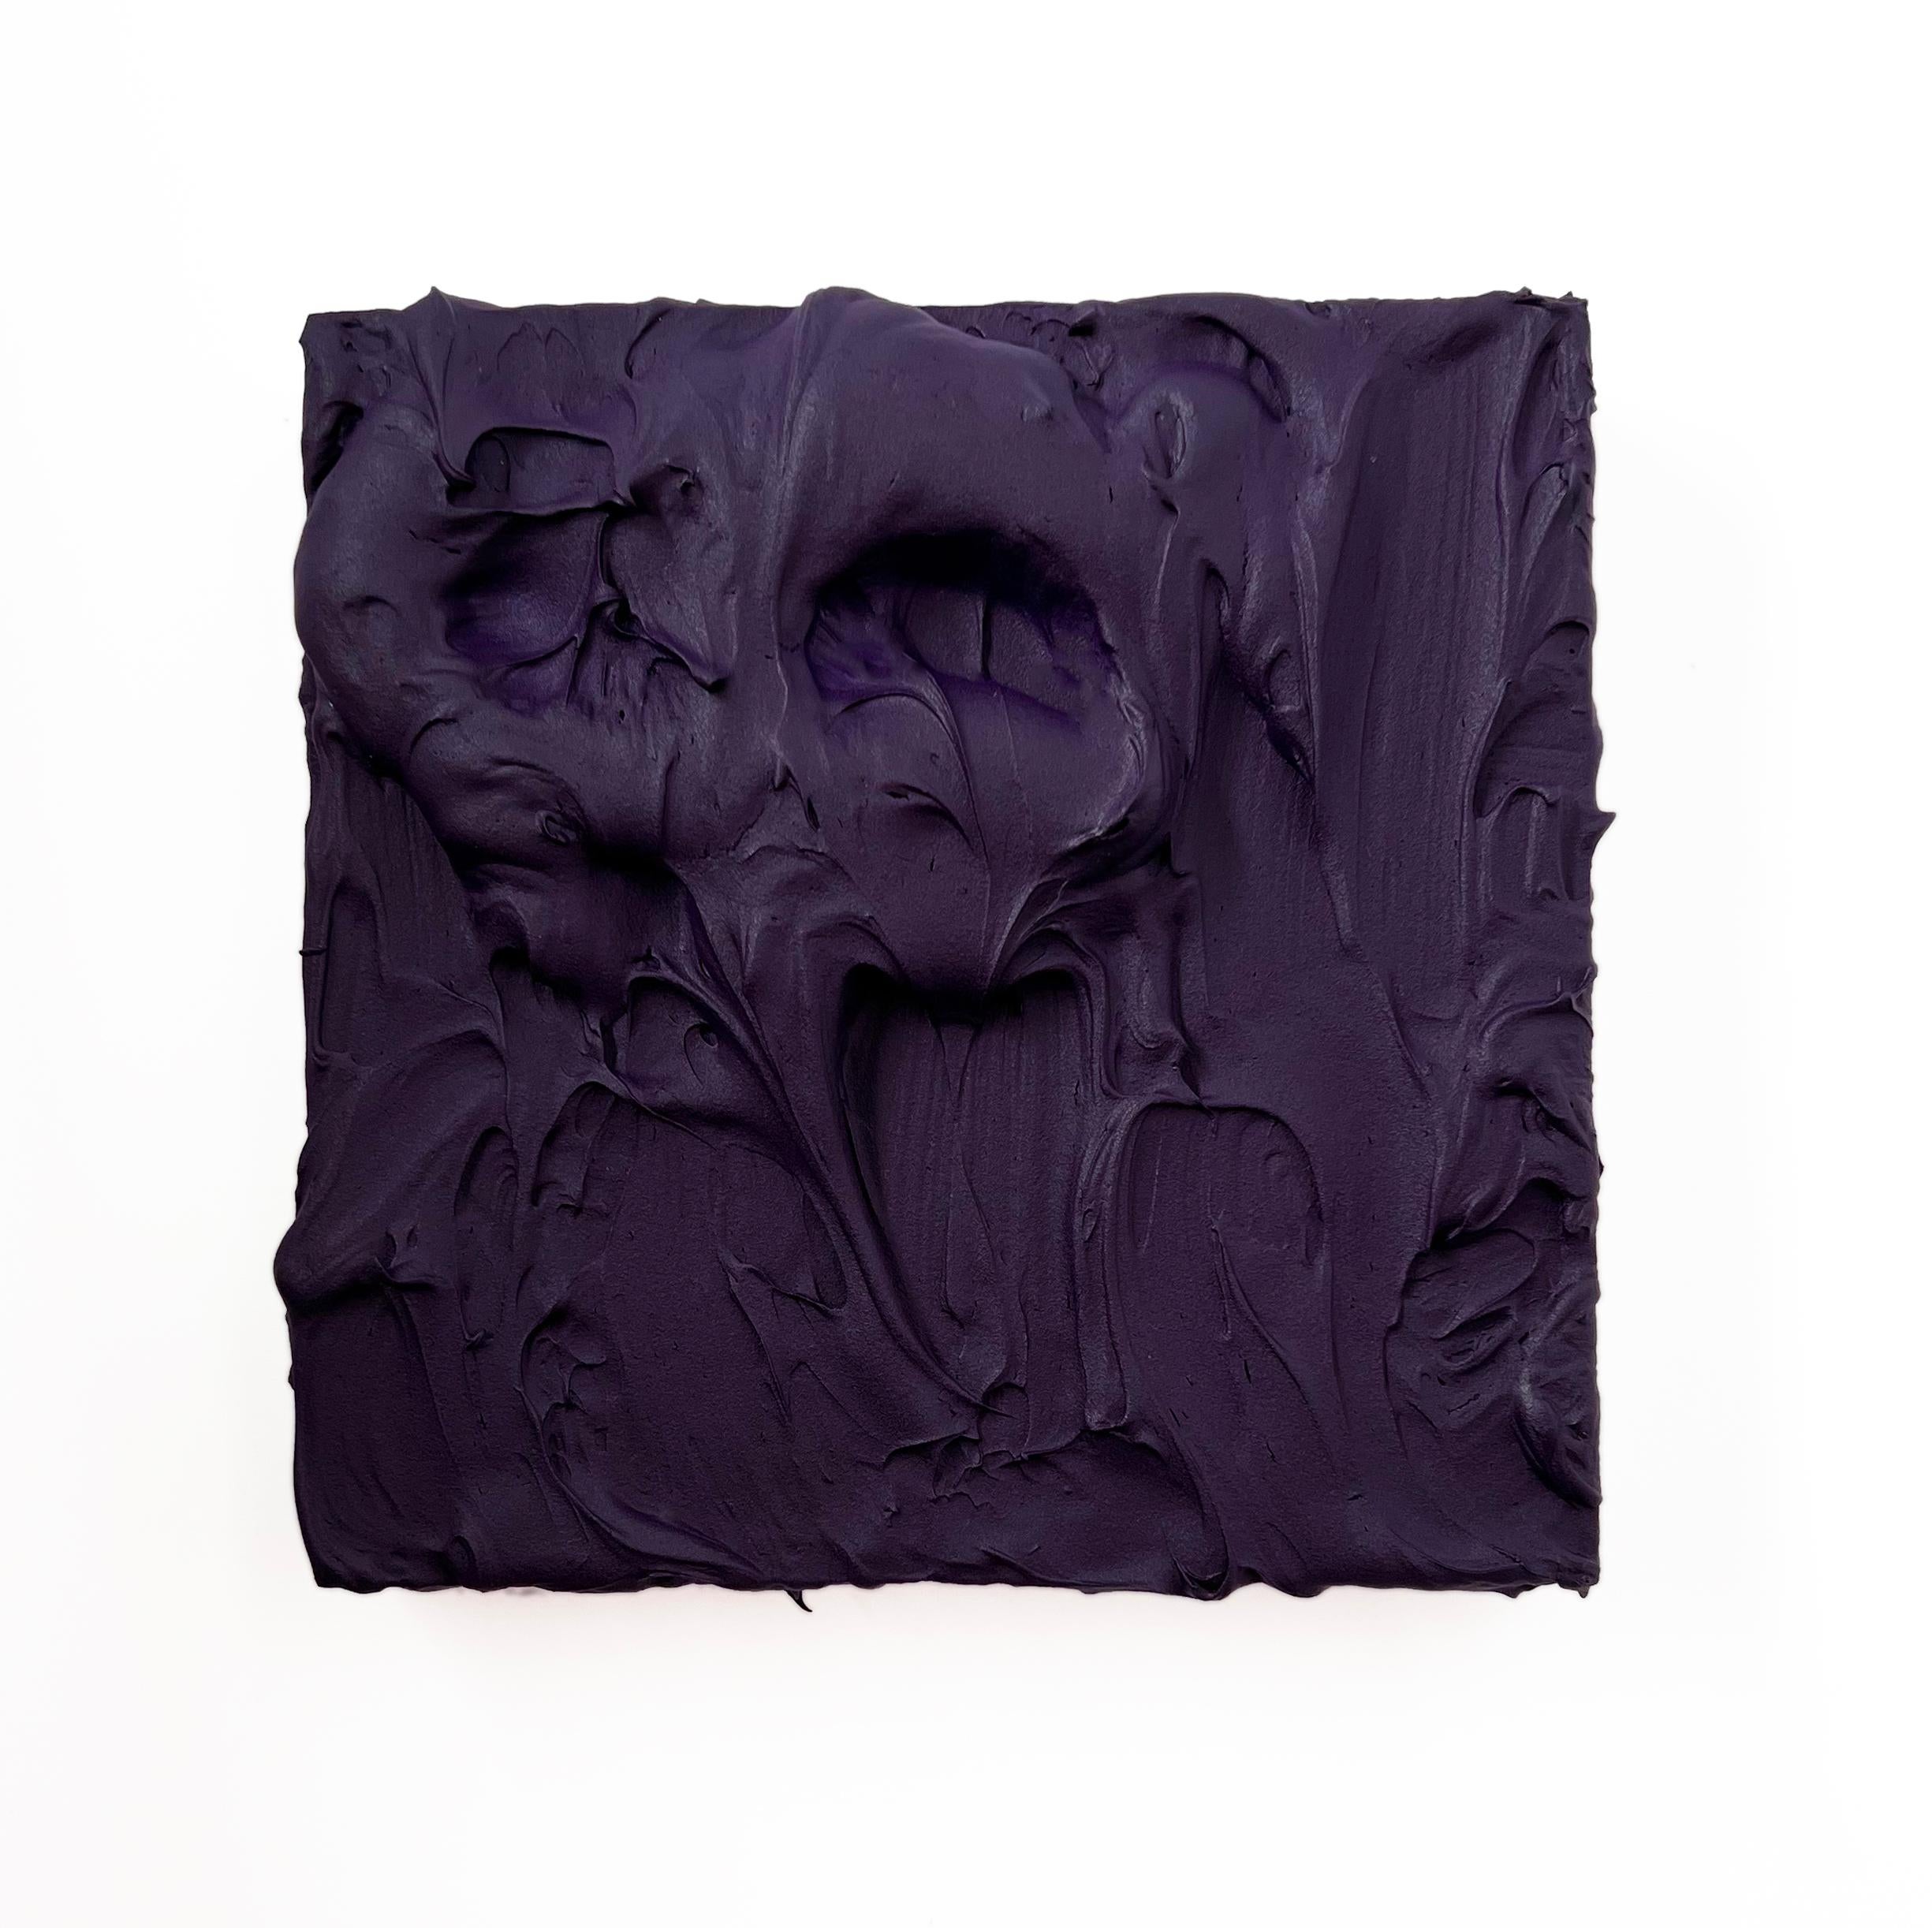 Chloe Hedden Abstract Painting - Royal Purple Excess (thick impasto painting monochrome pop art square design)